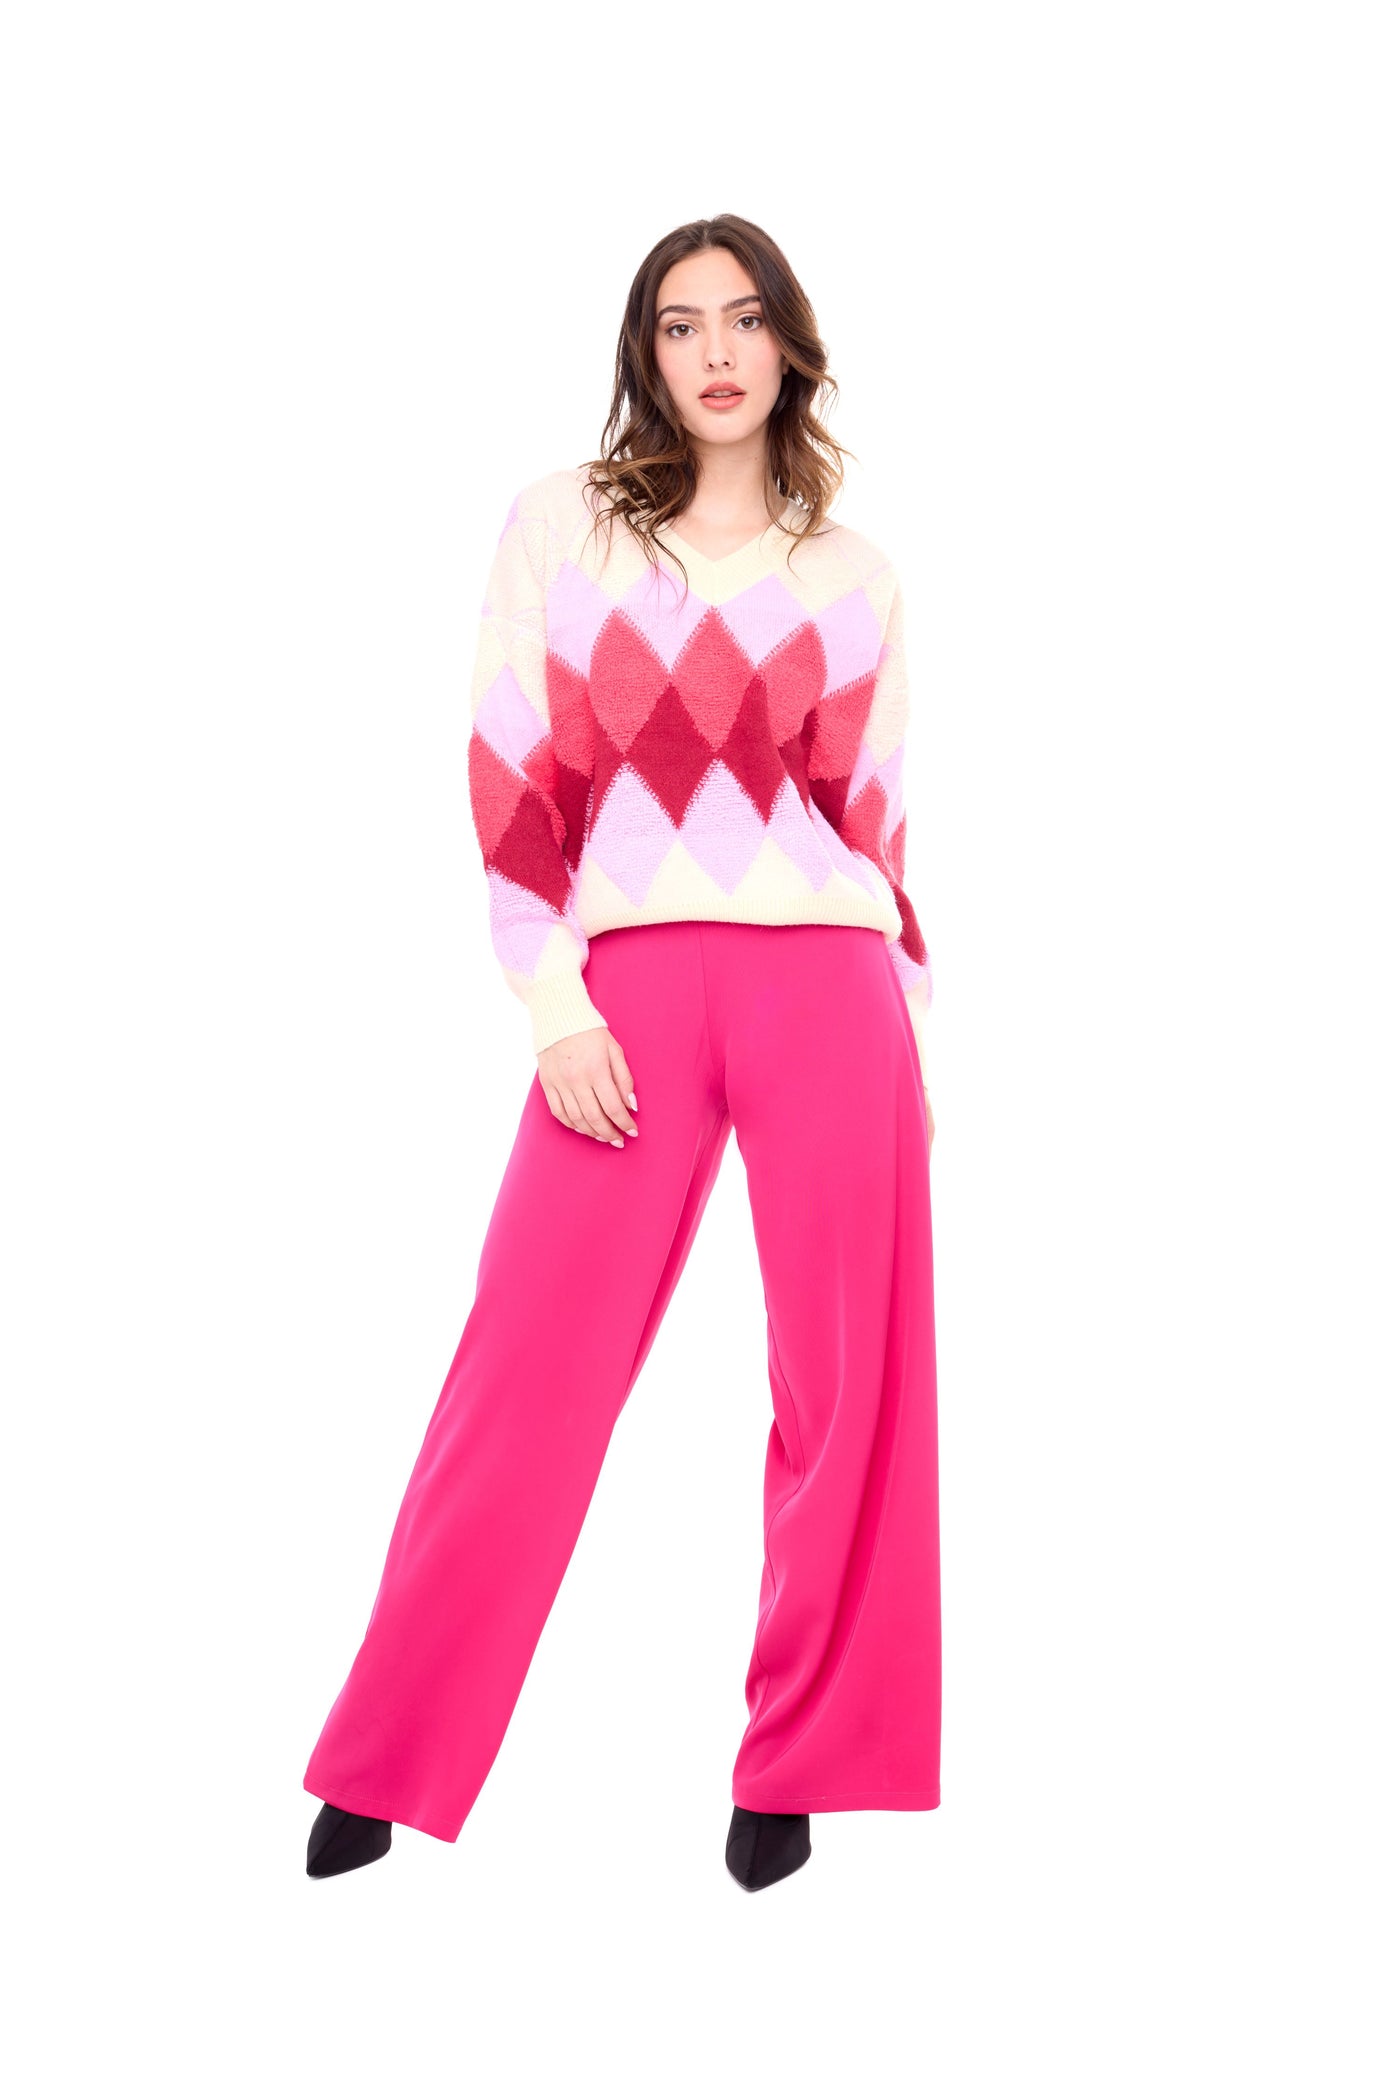 WINTER WIDE LEG PANT - black or candy pink